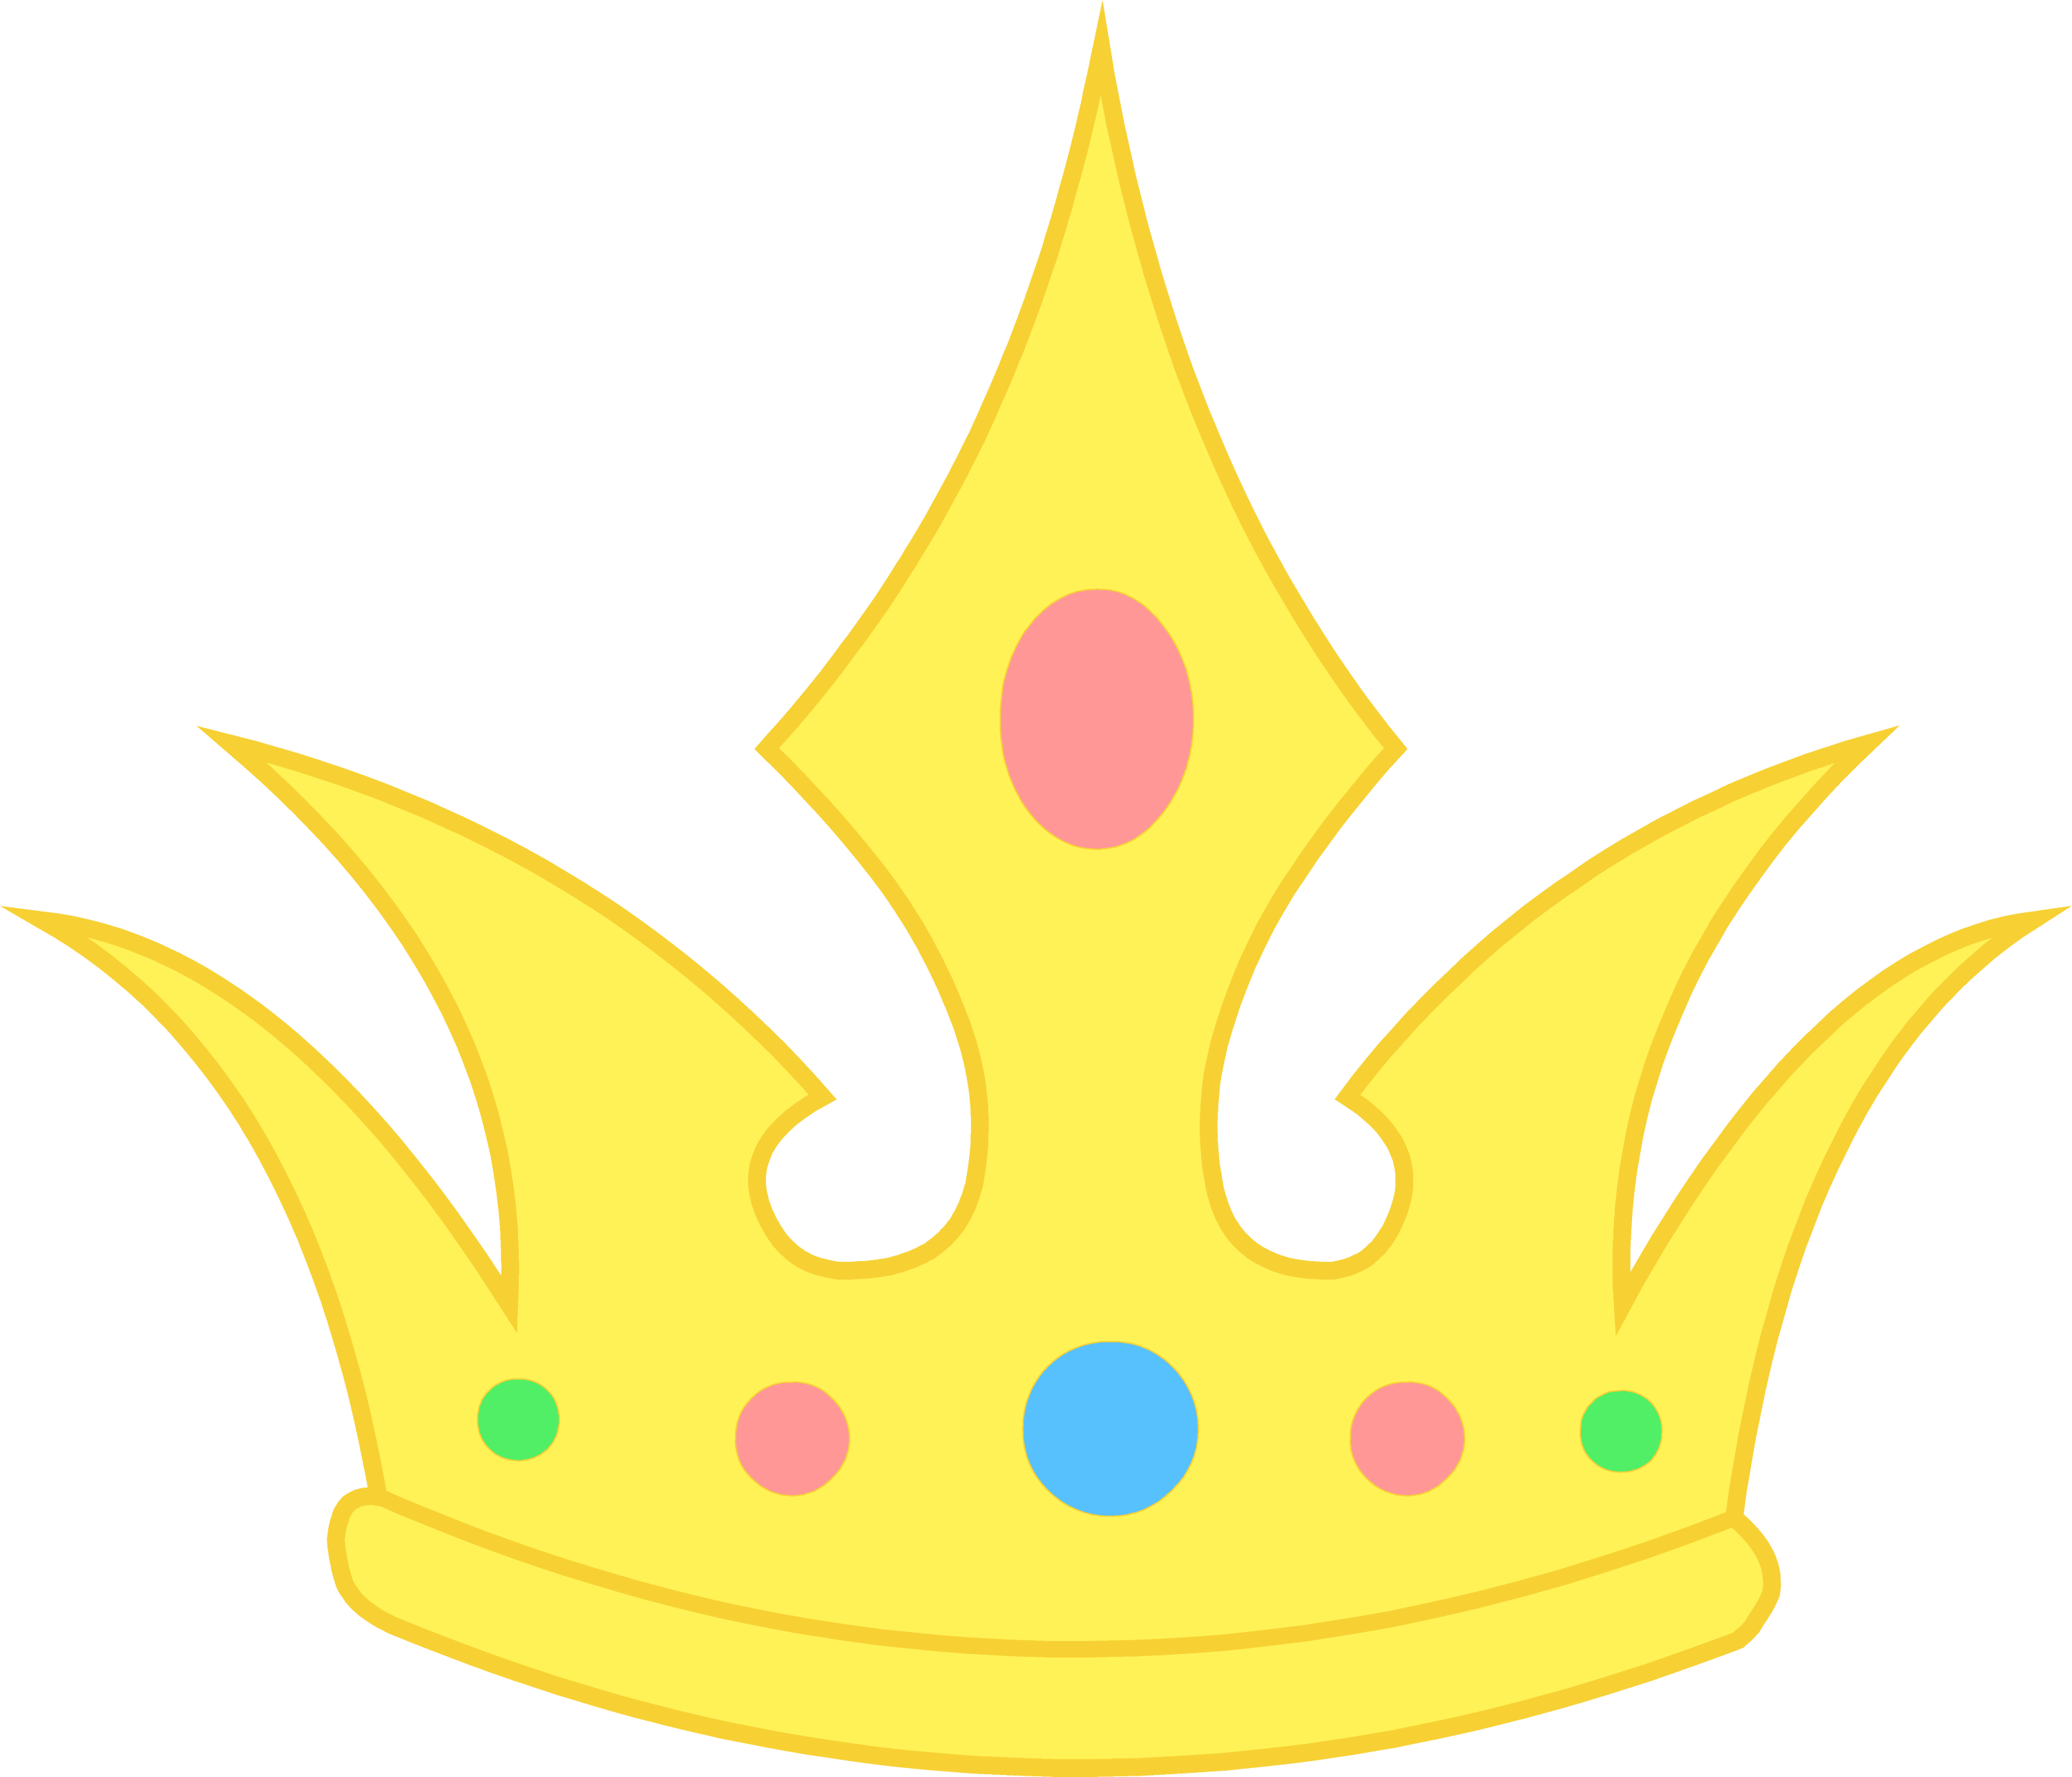 free clipart images crowns - photo #25